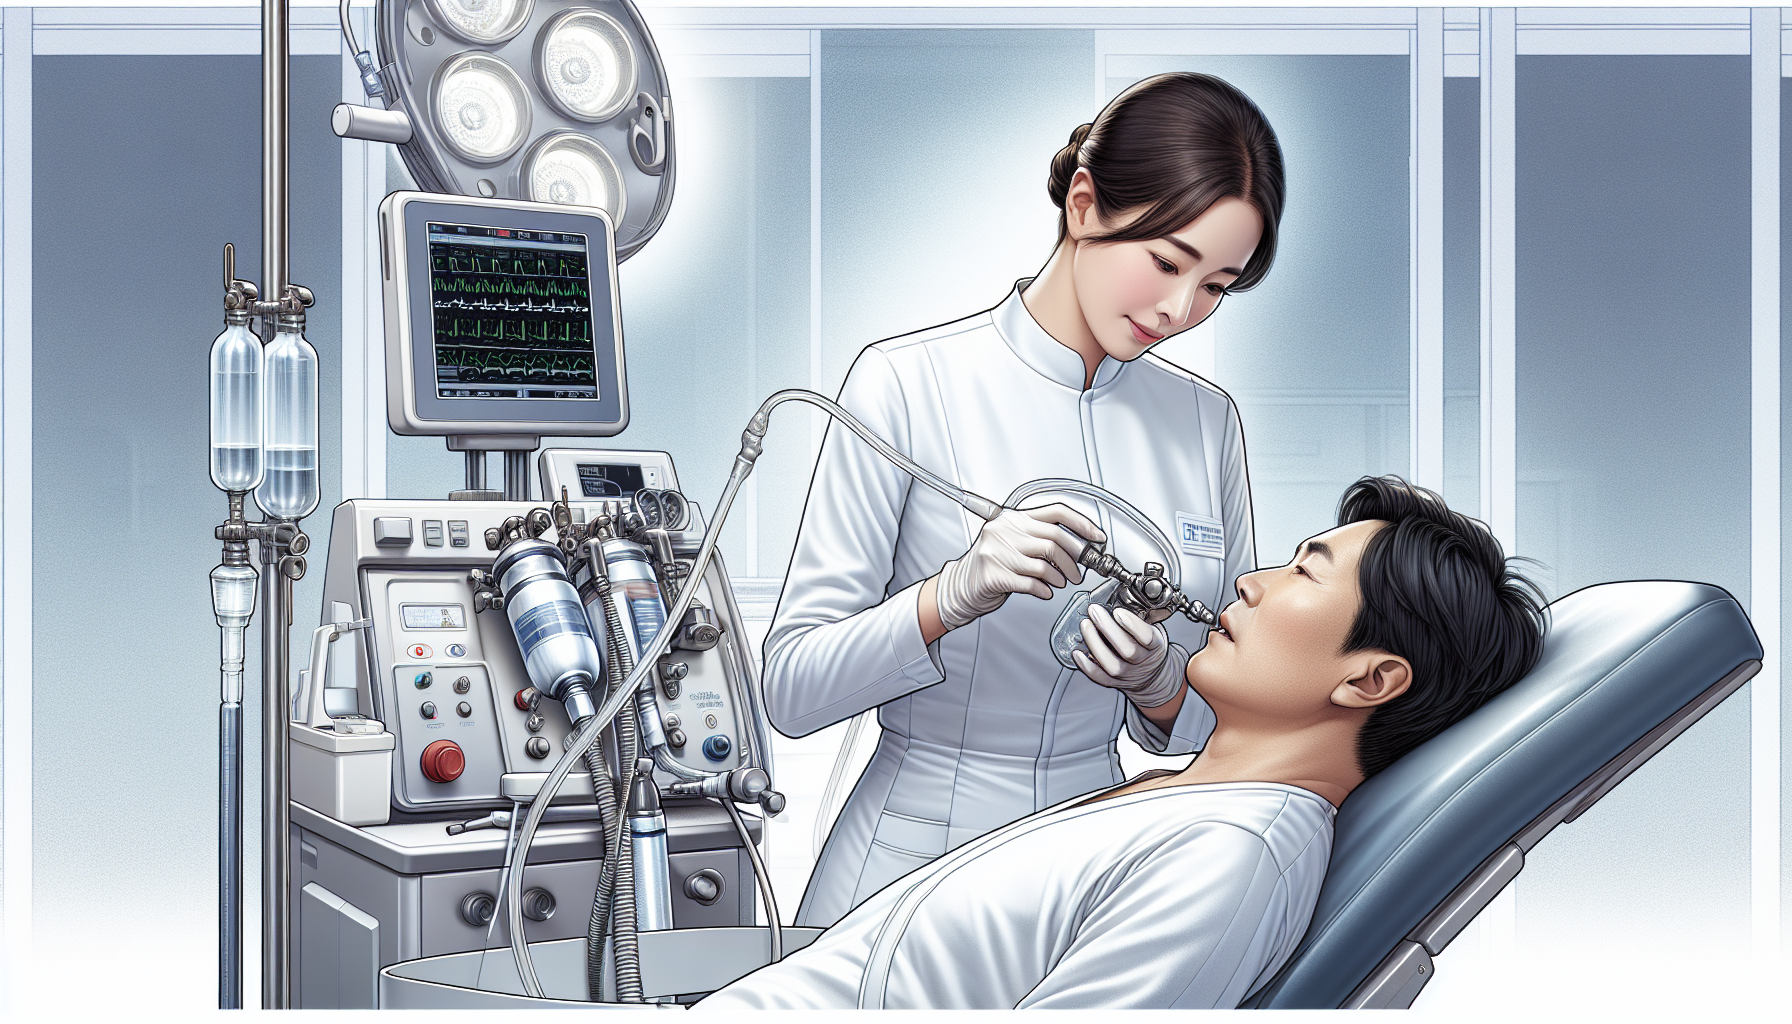 Illustration of a medical professional administering nitrous oxide to a patient